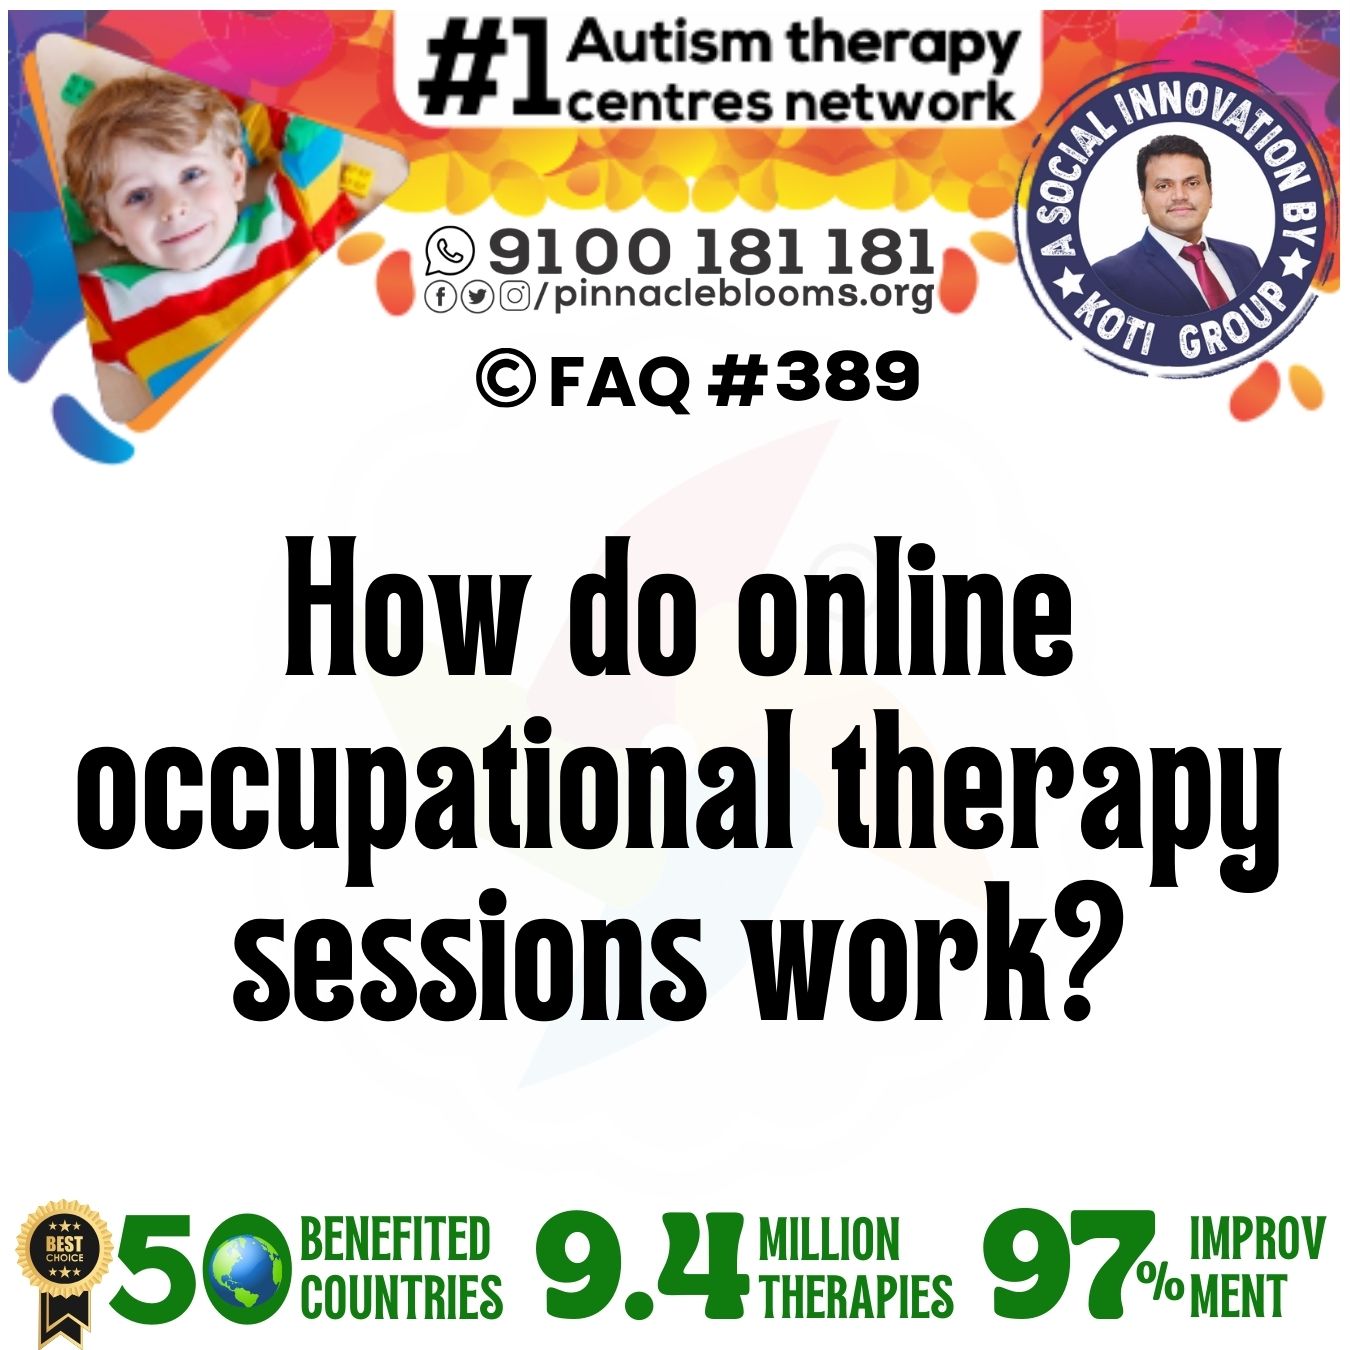 How do online occupational therapy sessions work?